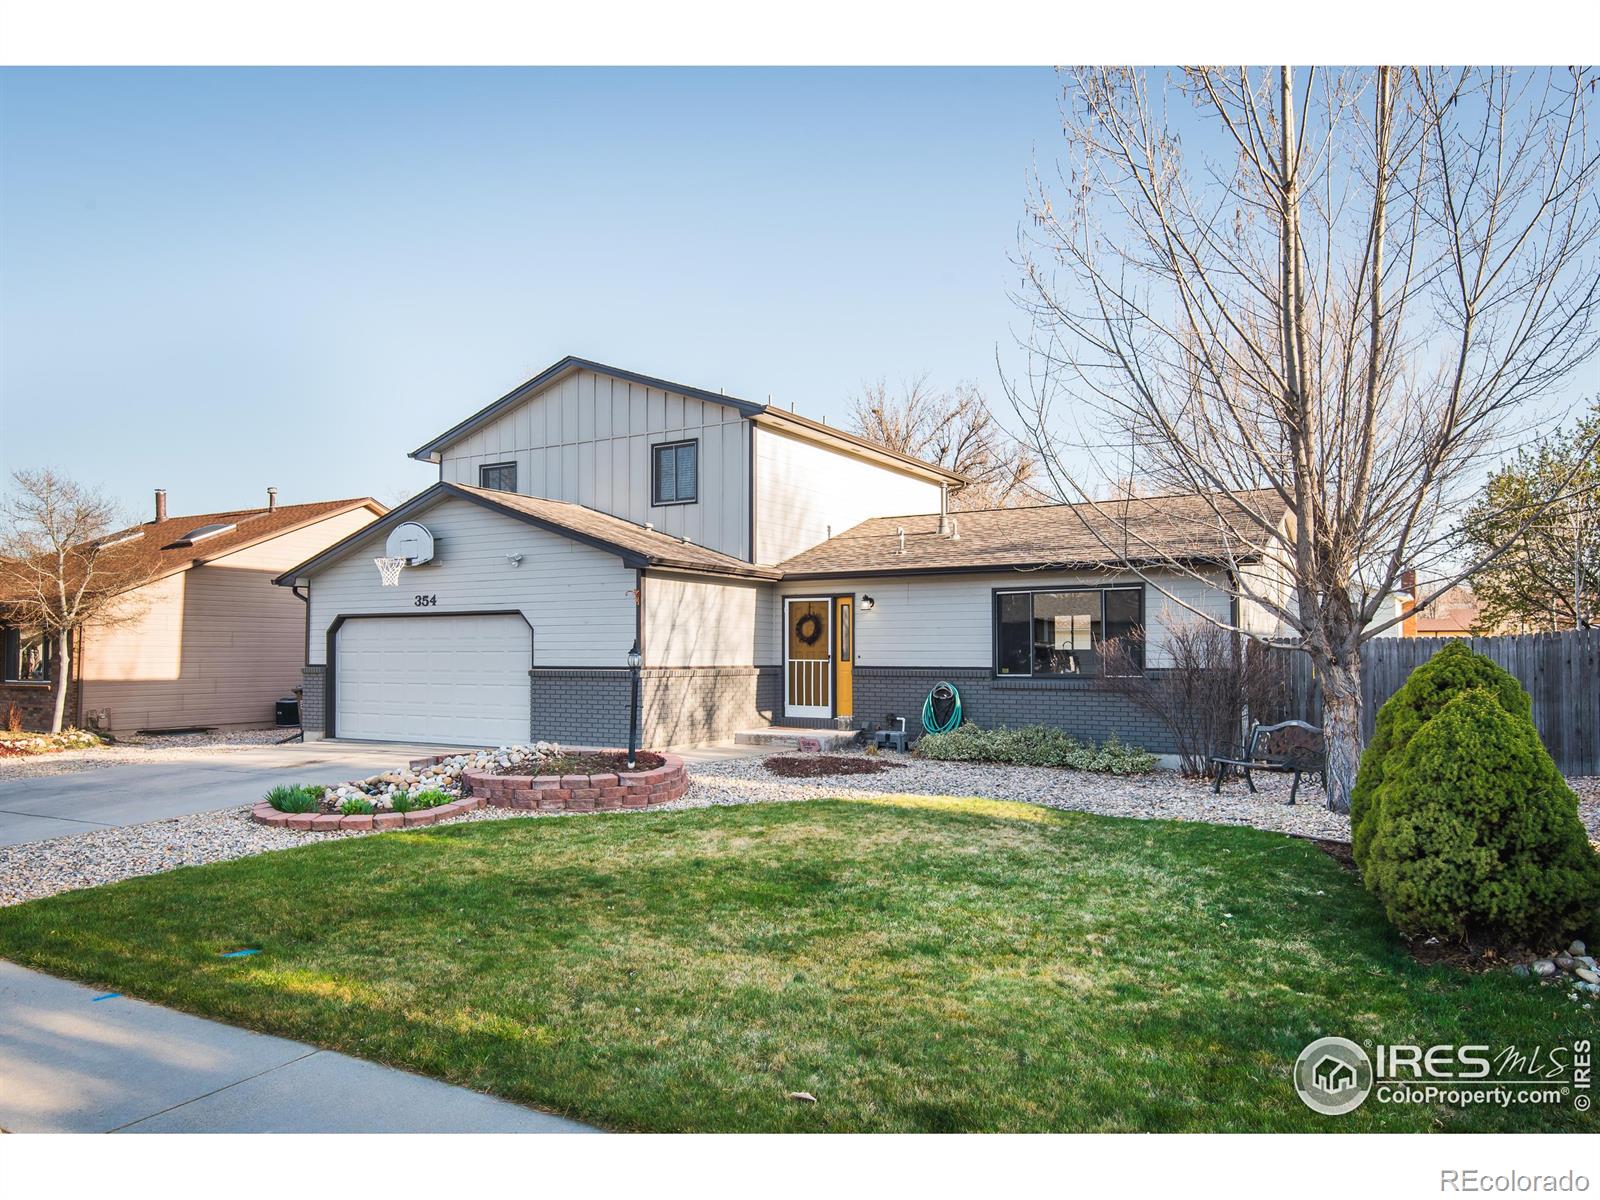 Report Image for 354  Hawthorn Drive,Loveland, Colorado